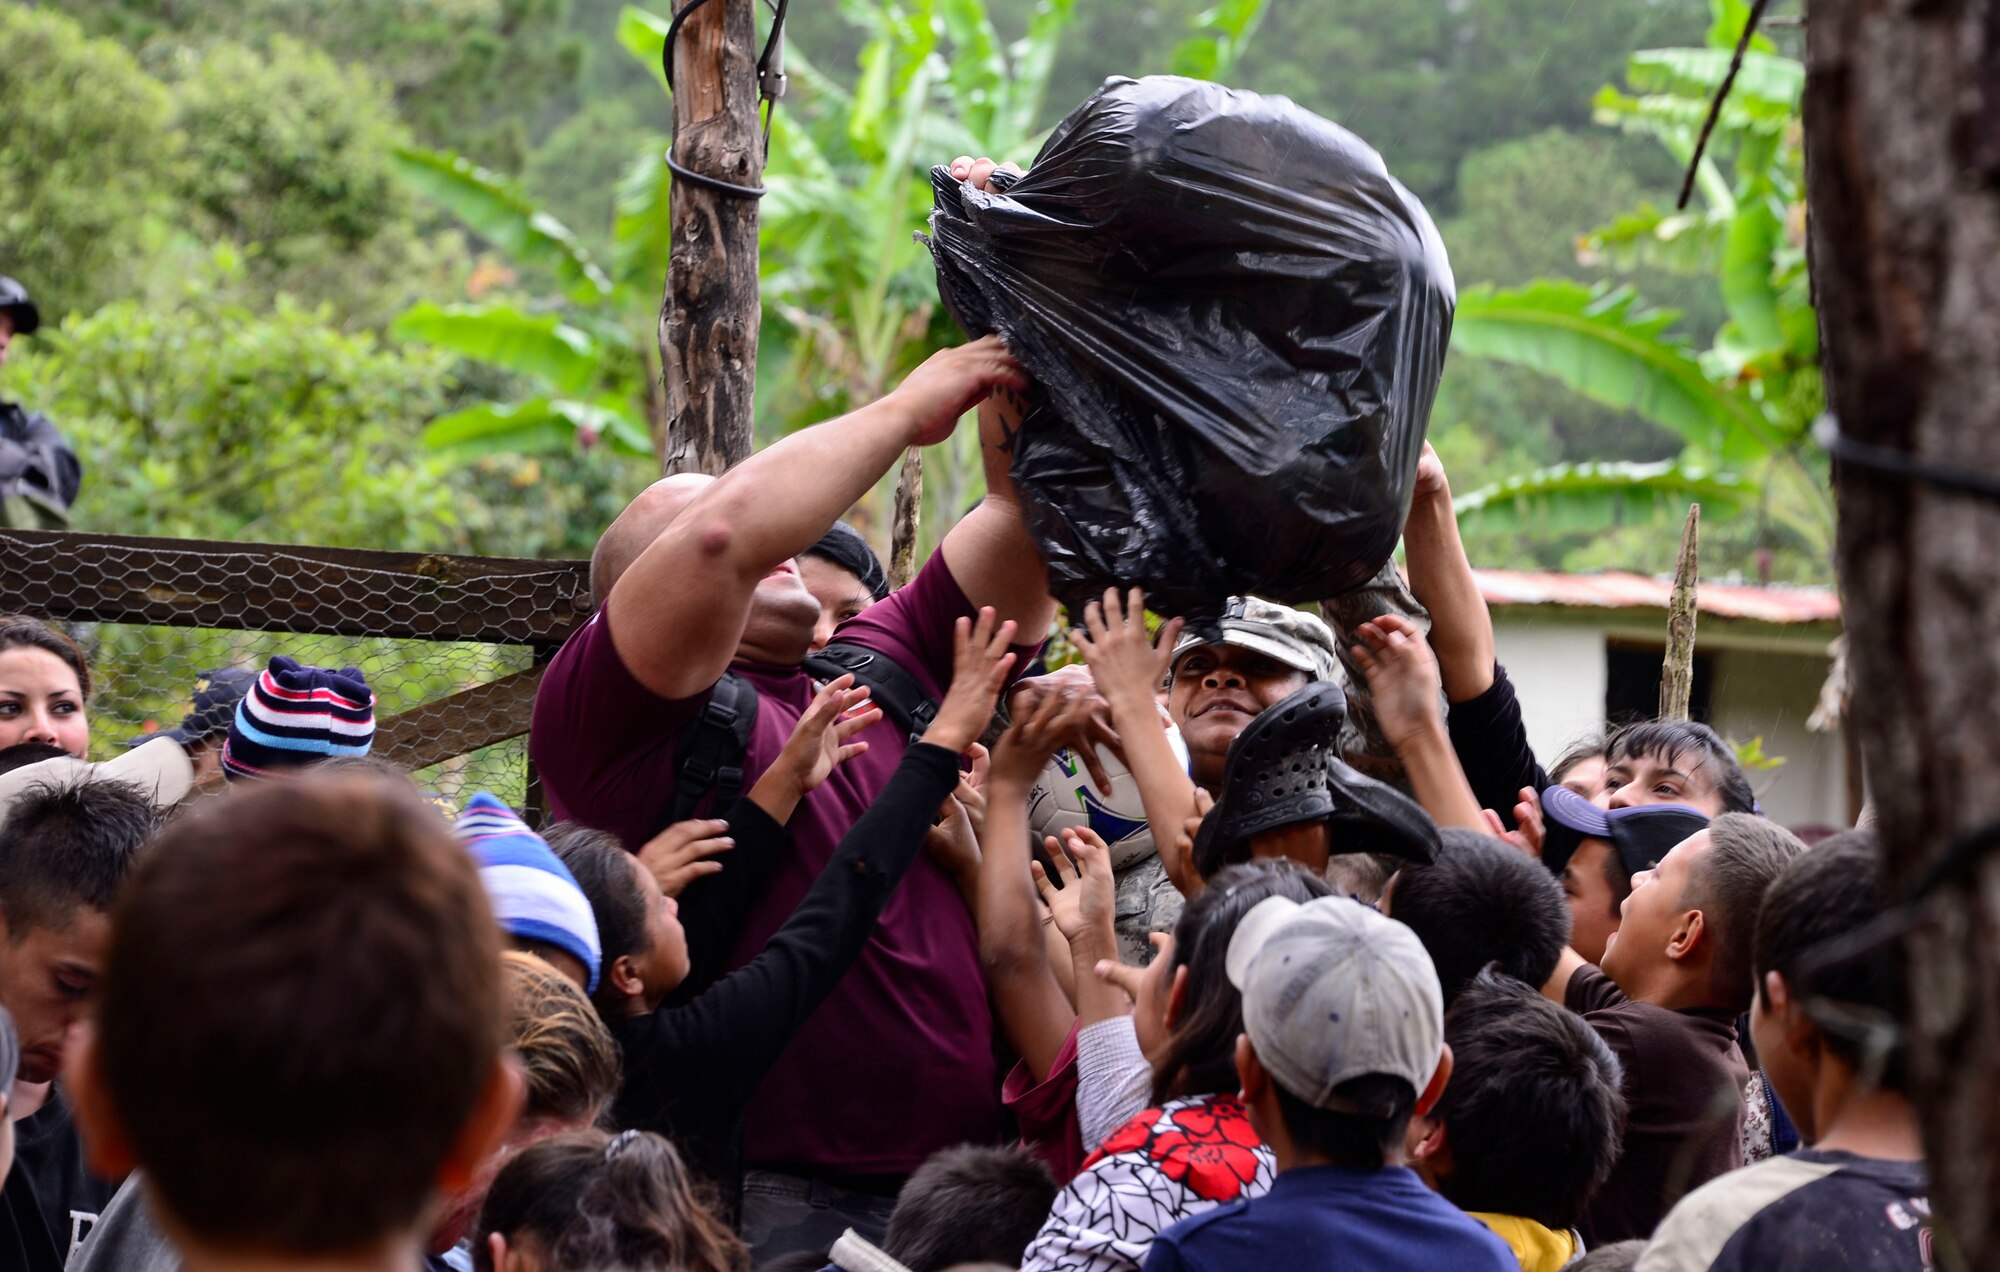 Volunteers from Joint Task Force-Bravo try to maintain order while handing out soccer balls to the children in Potrerillos, Siguatepeque, Honduras, Oct. 25, 2014.  The soccer balls were donated by the non-profit organization Kick for Nick Foundation.  As part of the 57th Chapel Hike, over 130 members assigned to Joint Task Force-Bravo laced up their hiking boots and trekked almost four miles up a mountain to help deliver over 3,500-pounds of donated dry goods to villagers in need. (U.S. Air Force photo/Tech. Sgt. Heather Redman)